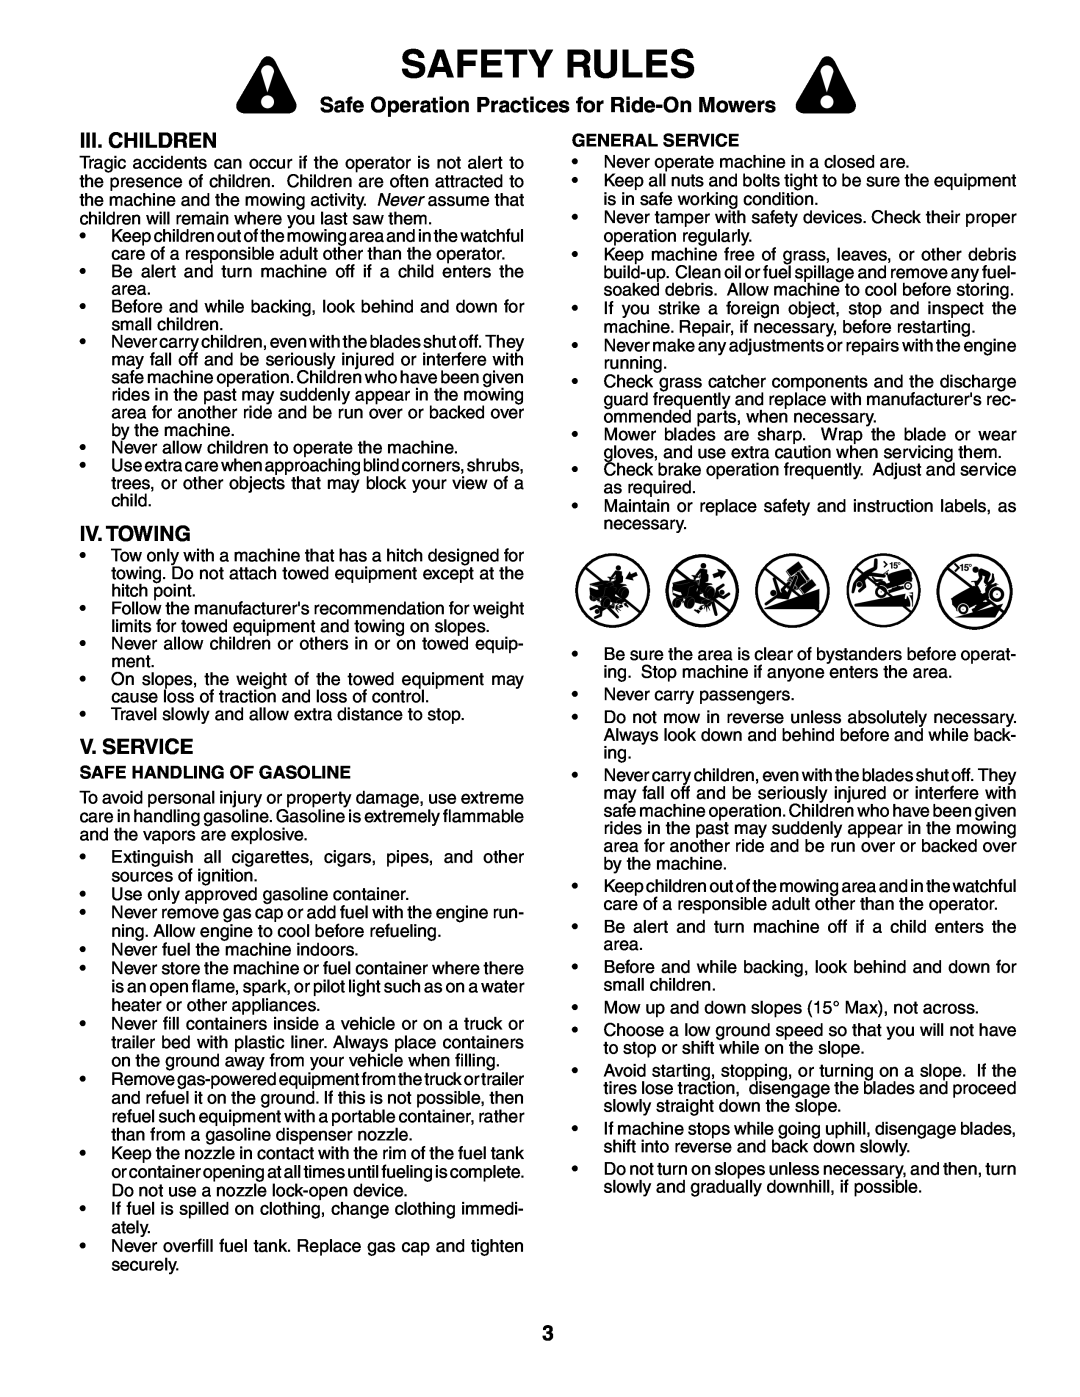 Husqvarna LTH1542 Iii. Children, Iv. Towing, V. Service, Safety Rules, Safe Operation Practices for Ride-On Mowers 